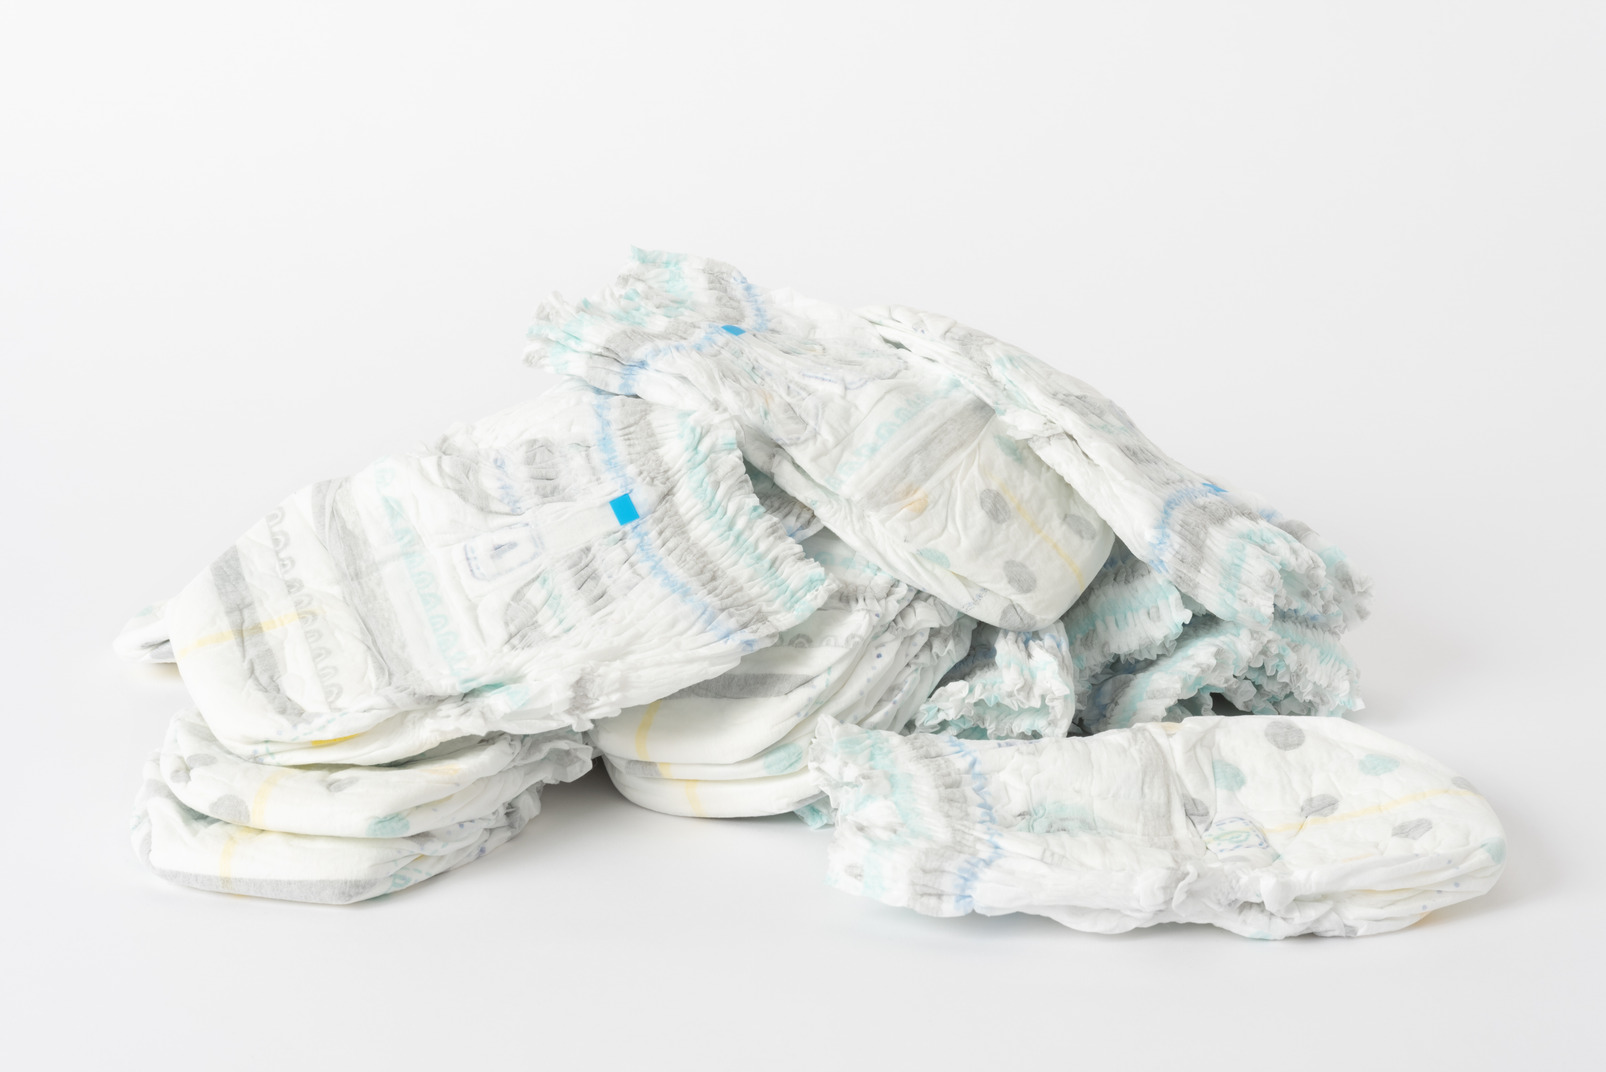 A pile of diapers